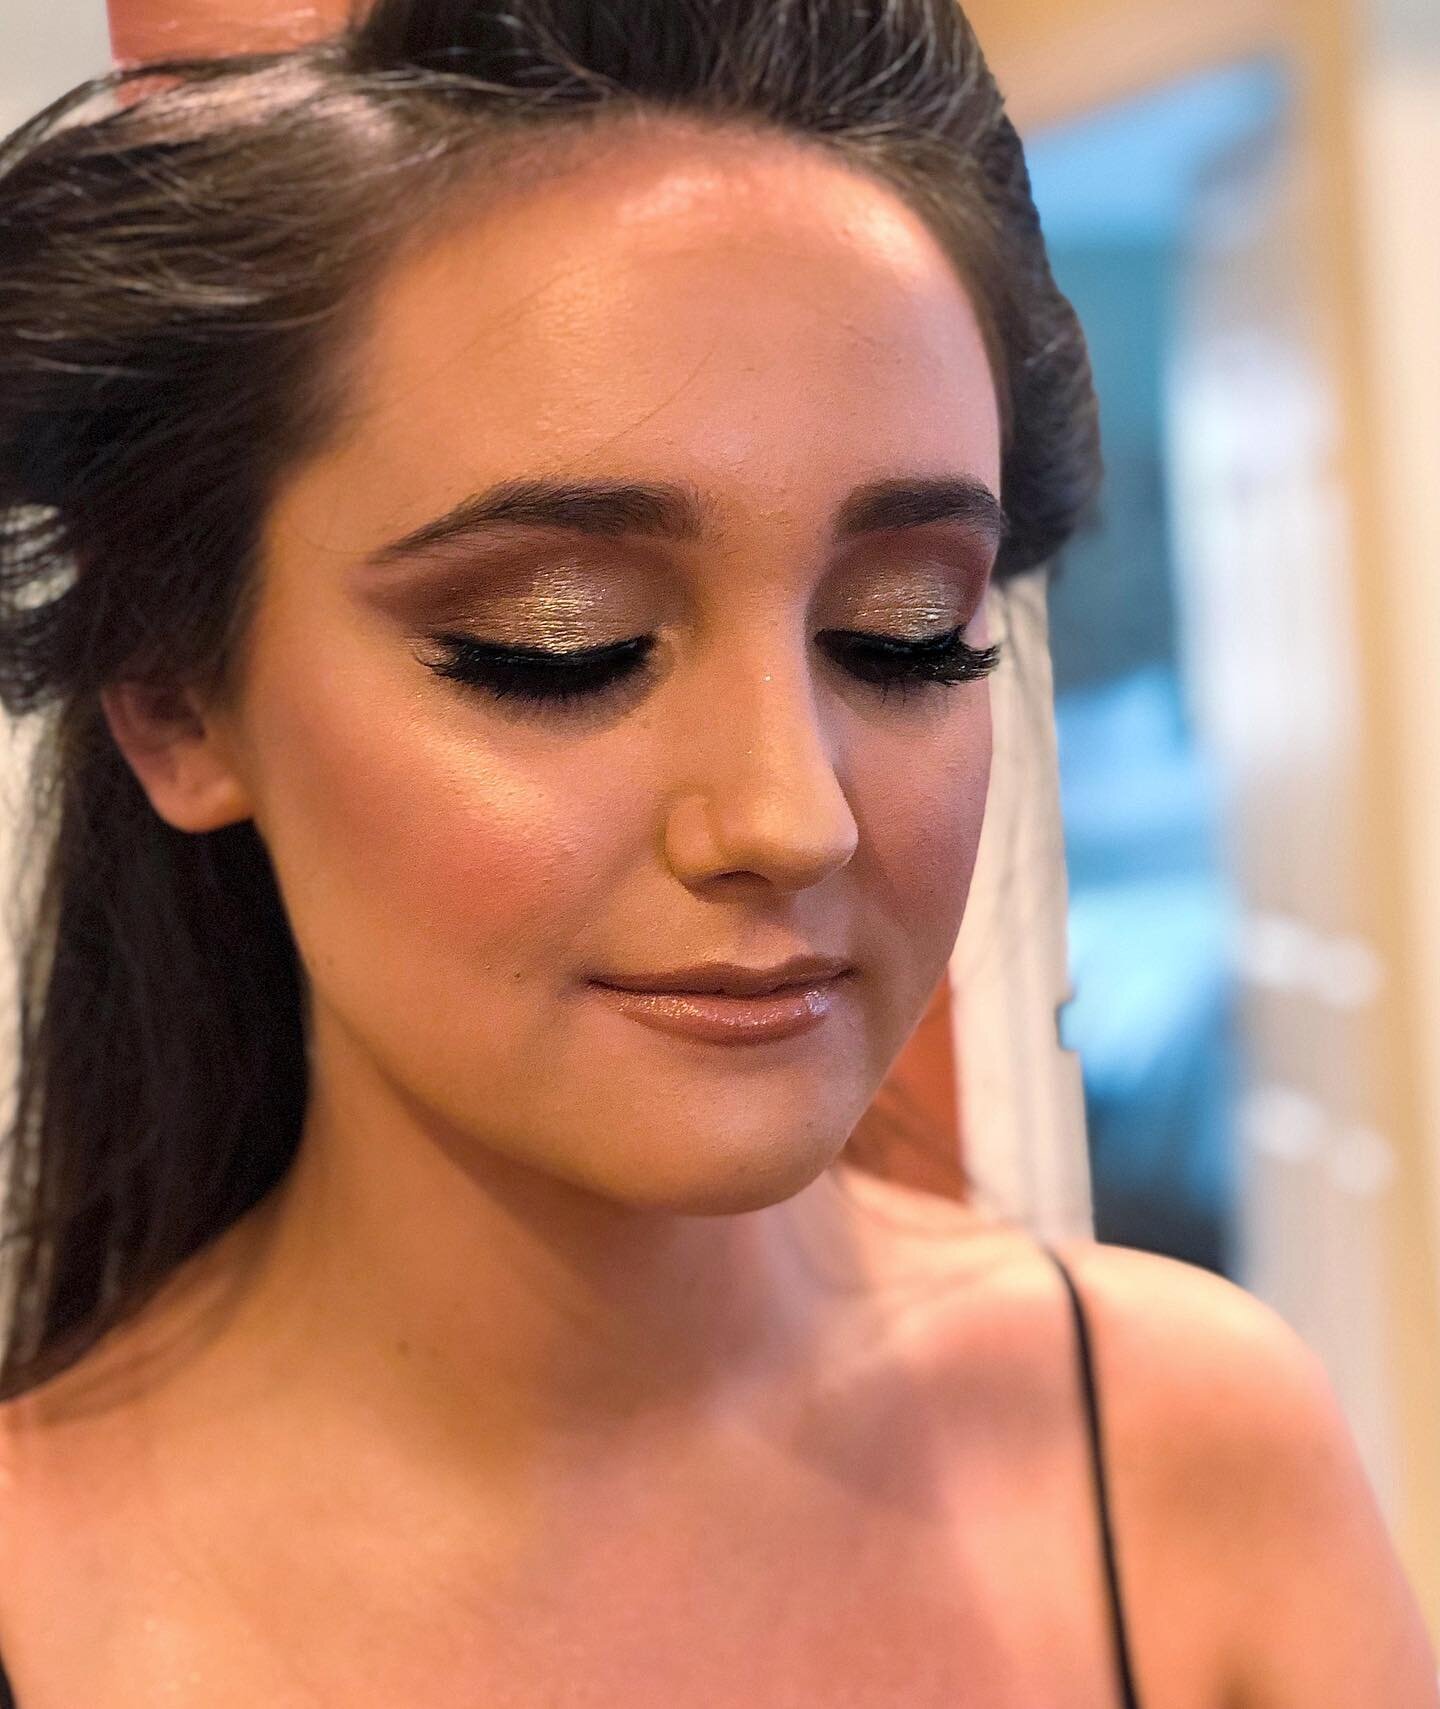 A monochromatic moment, with a hint of sparkle for this beauty🌟✨
.
.
.
#makeupbyme #latepost #glammakeup #KElseArtistry